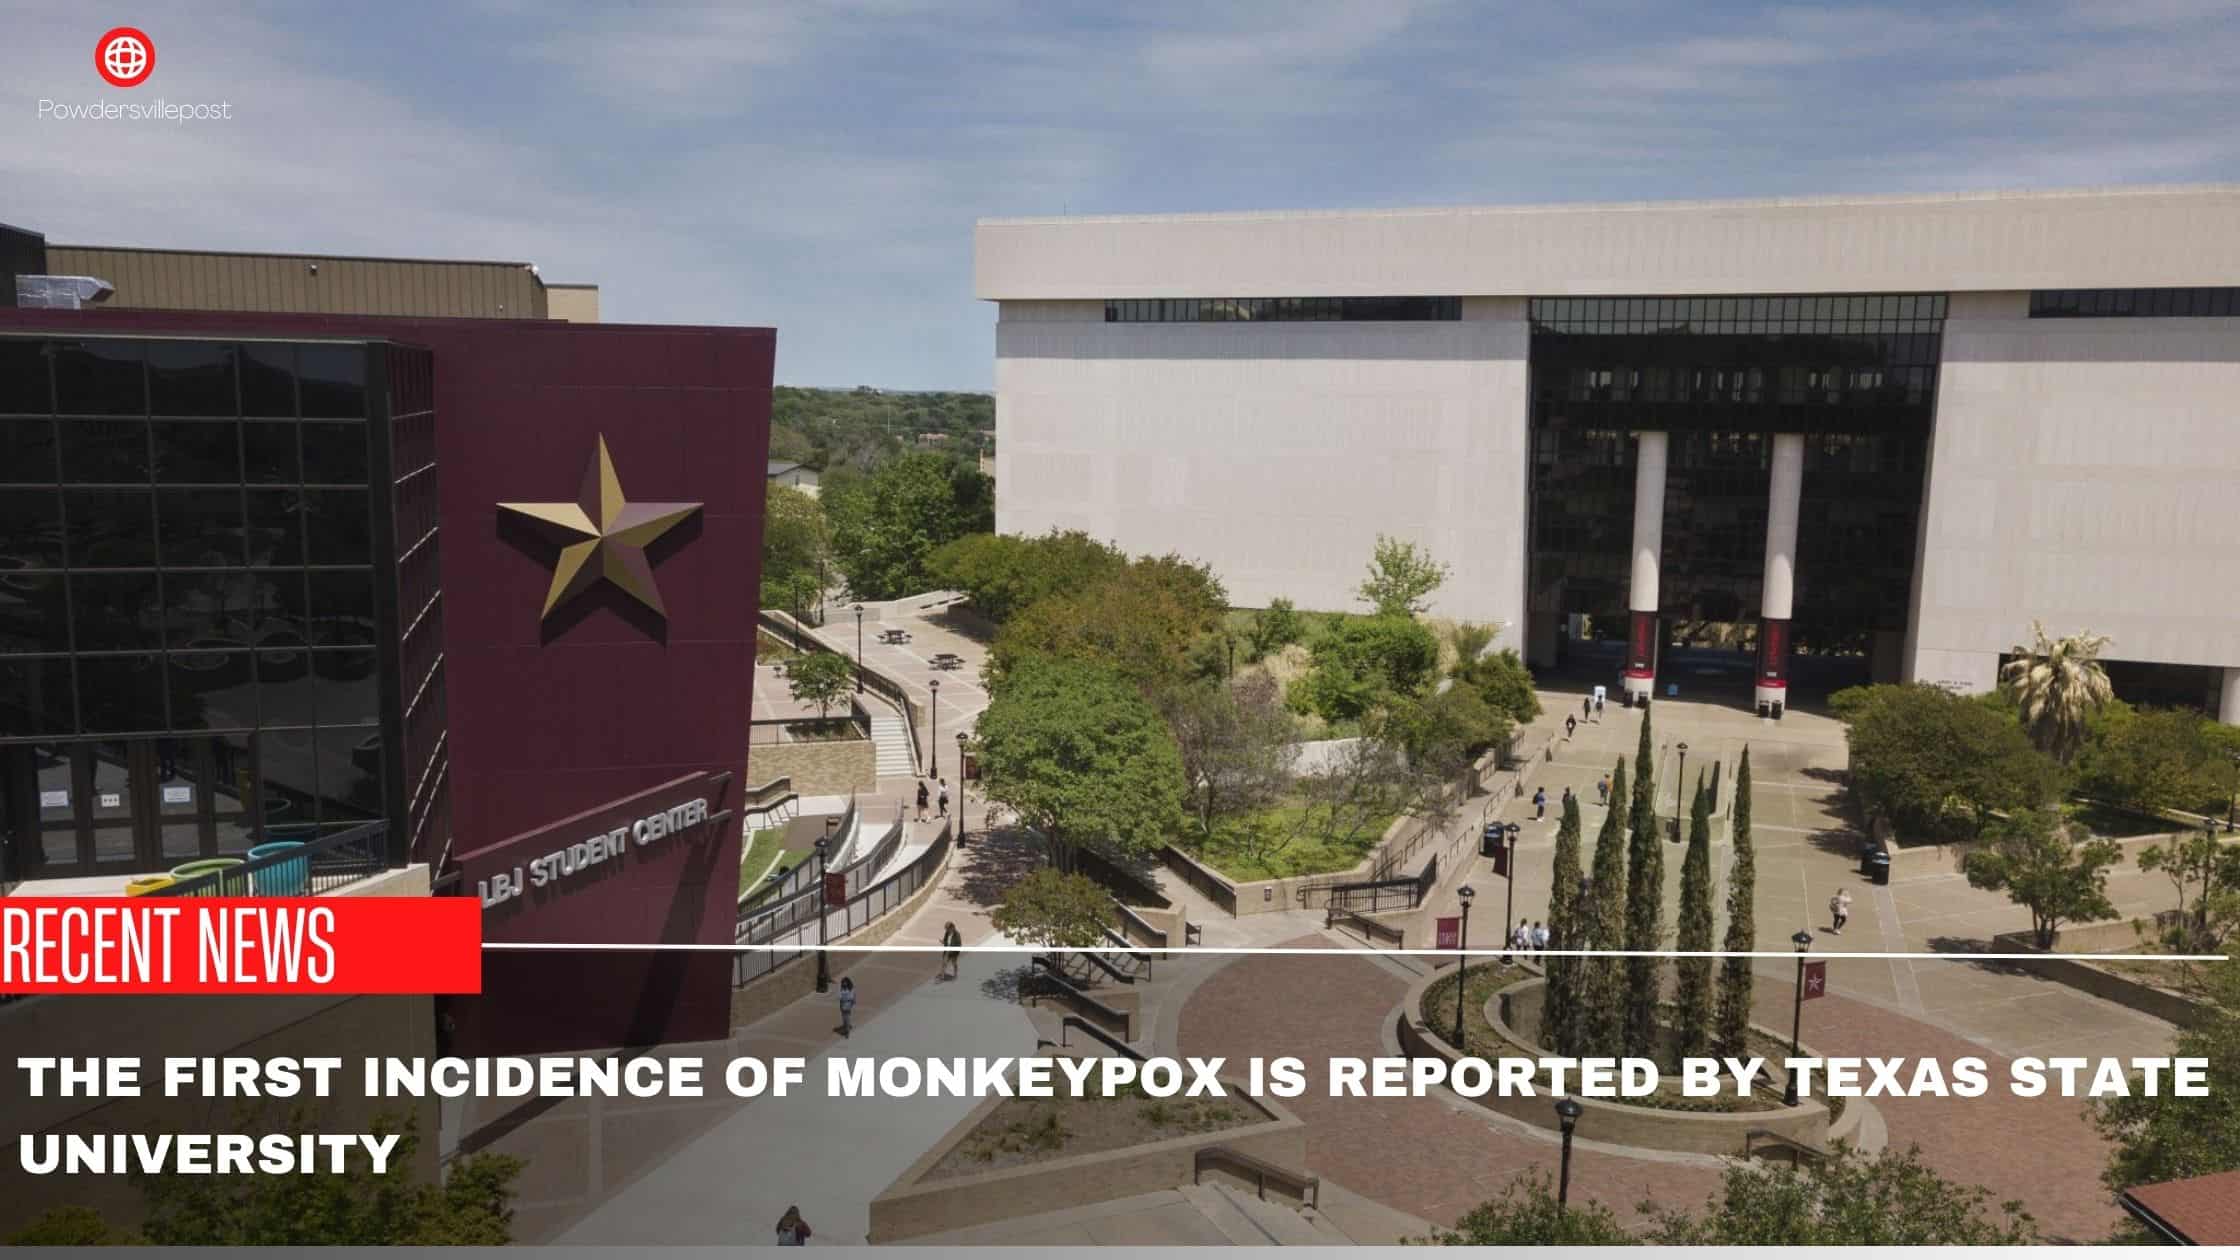 The First Incidence Of Monkeypox Is Reported By Texas State University